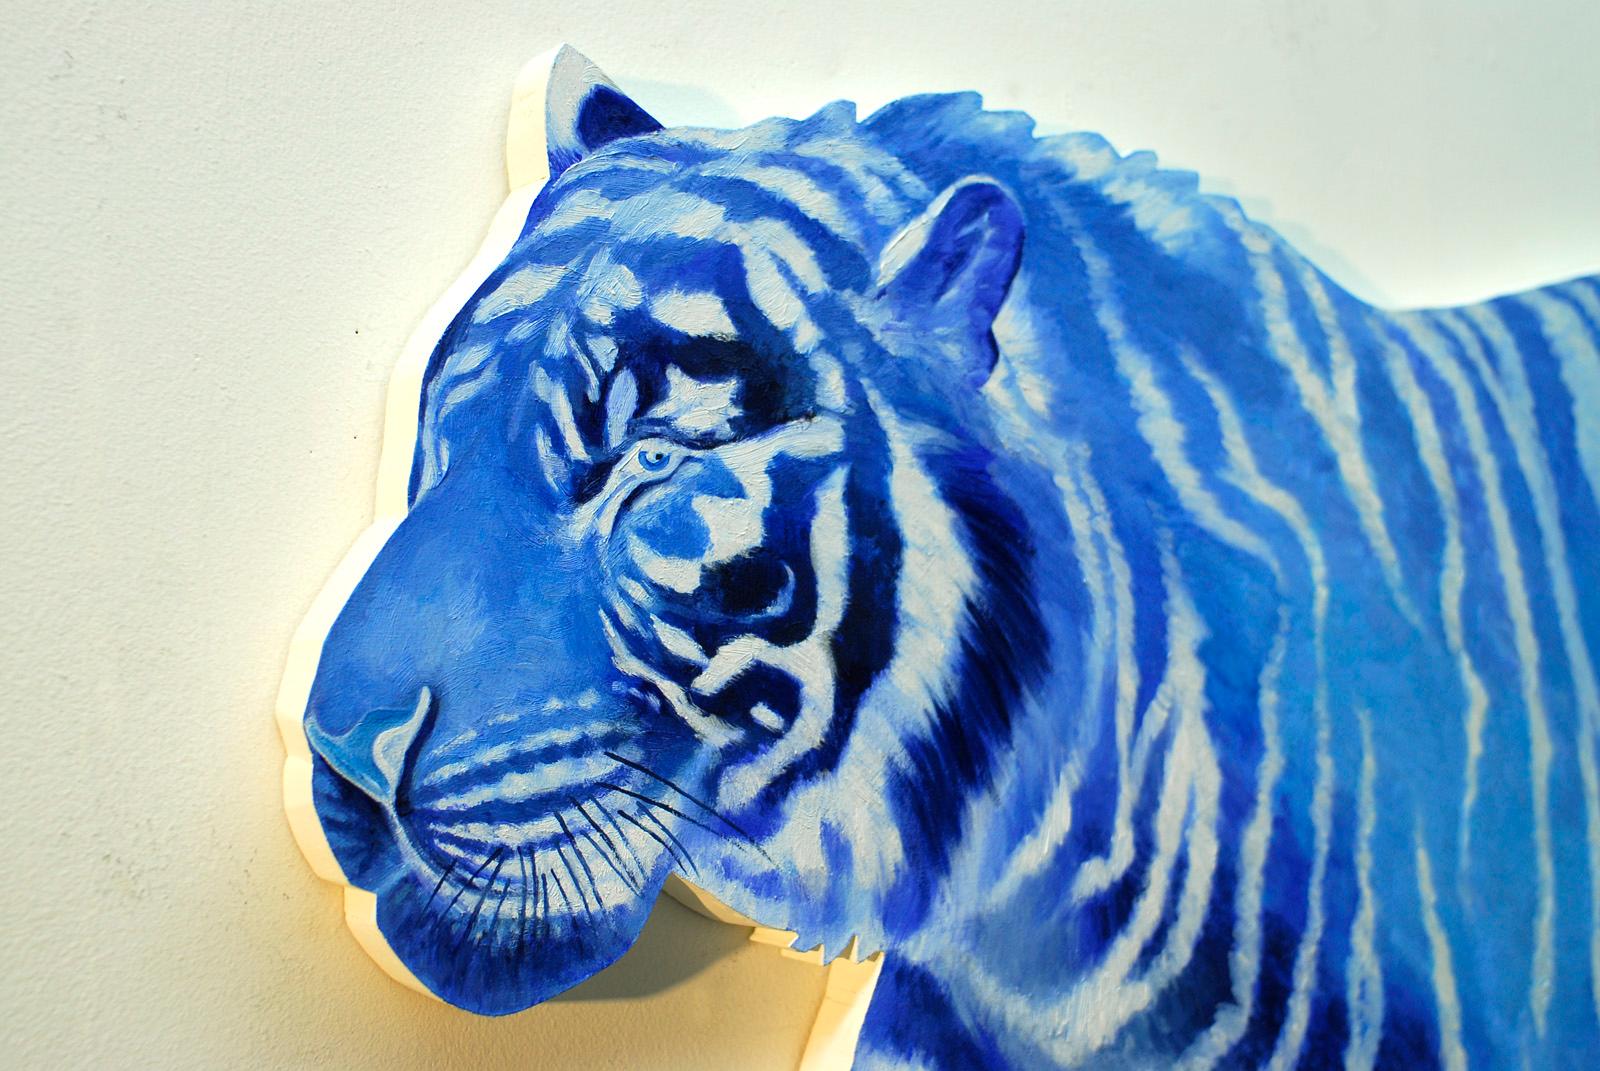 Bengal Tiger, oil on cut out wood panel, blue & white striped figurative, animal - Gray Animal Painting by Alexis Kandra